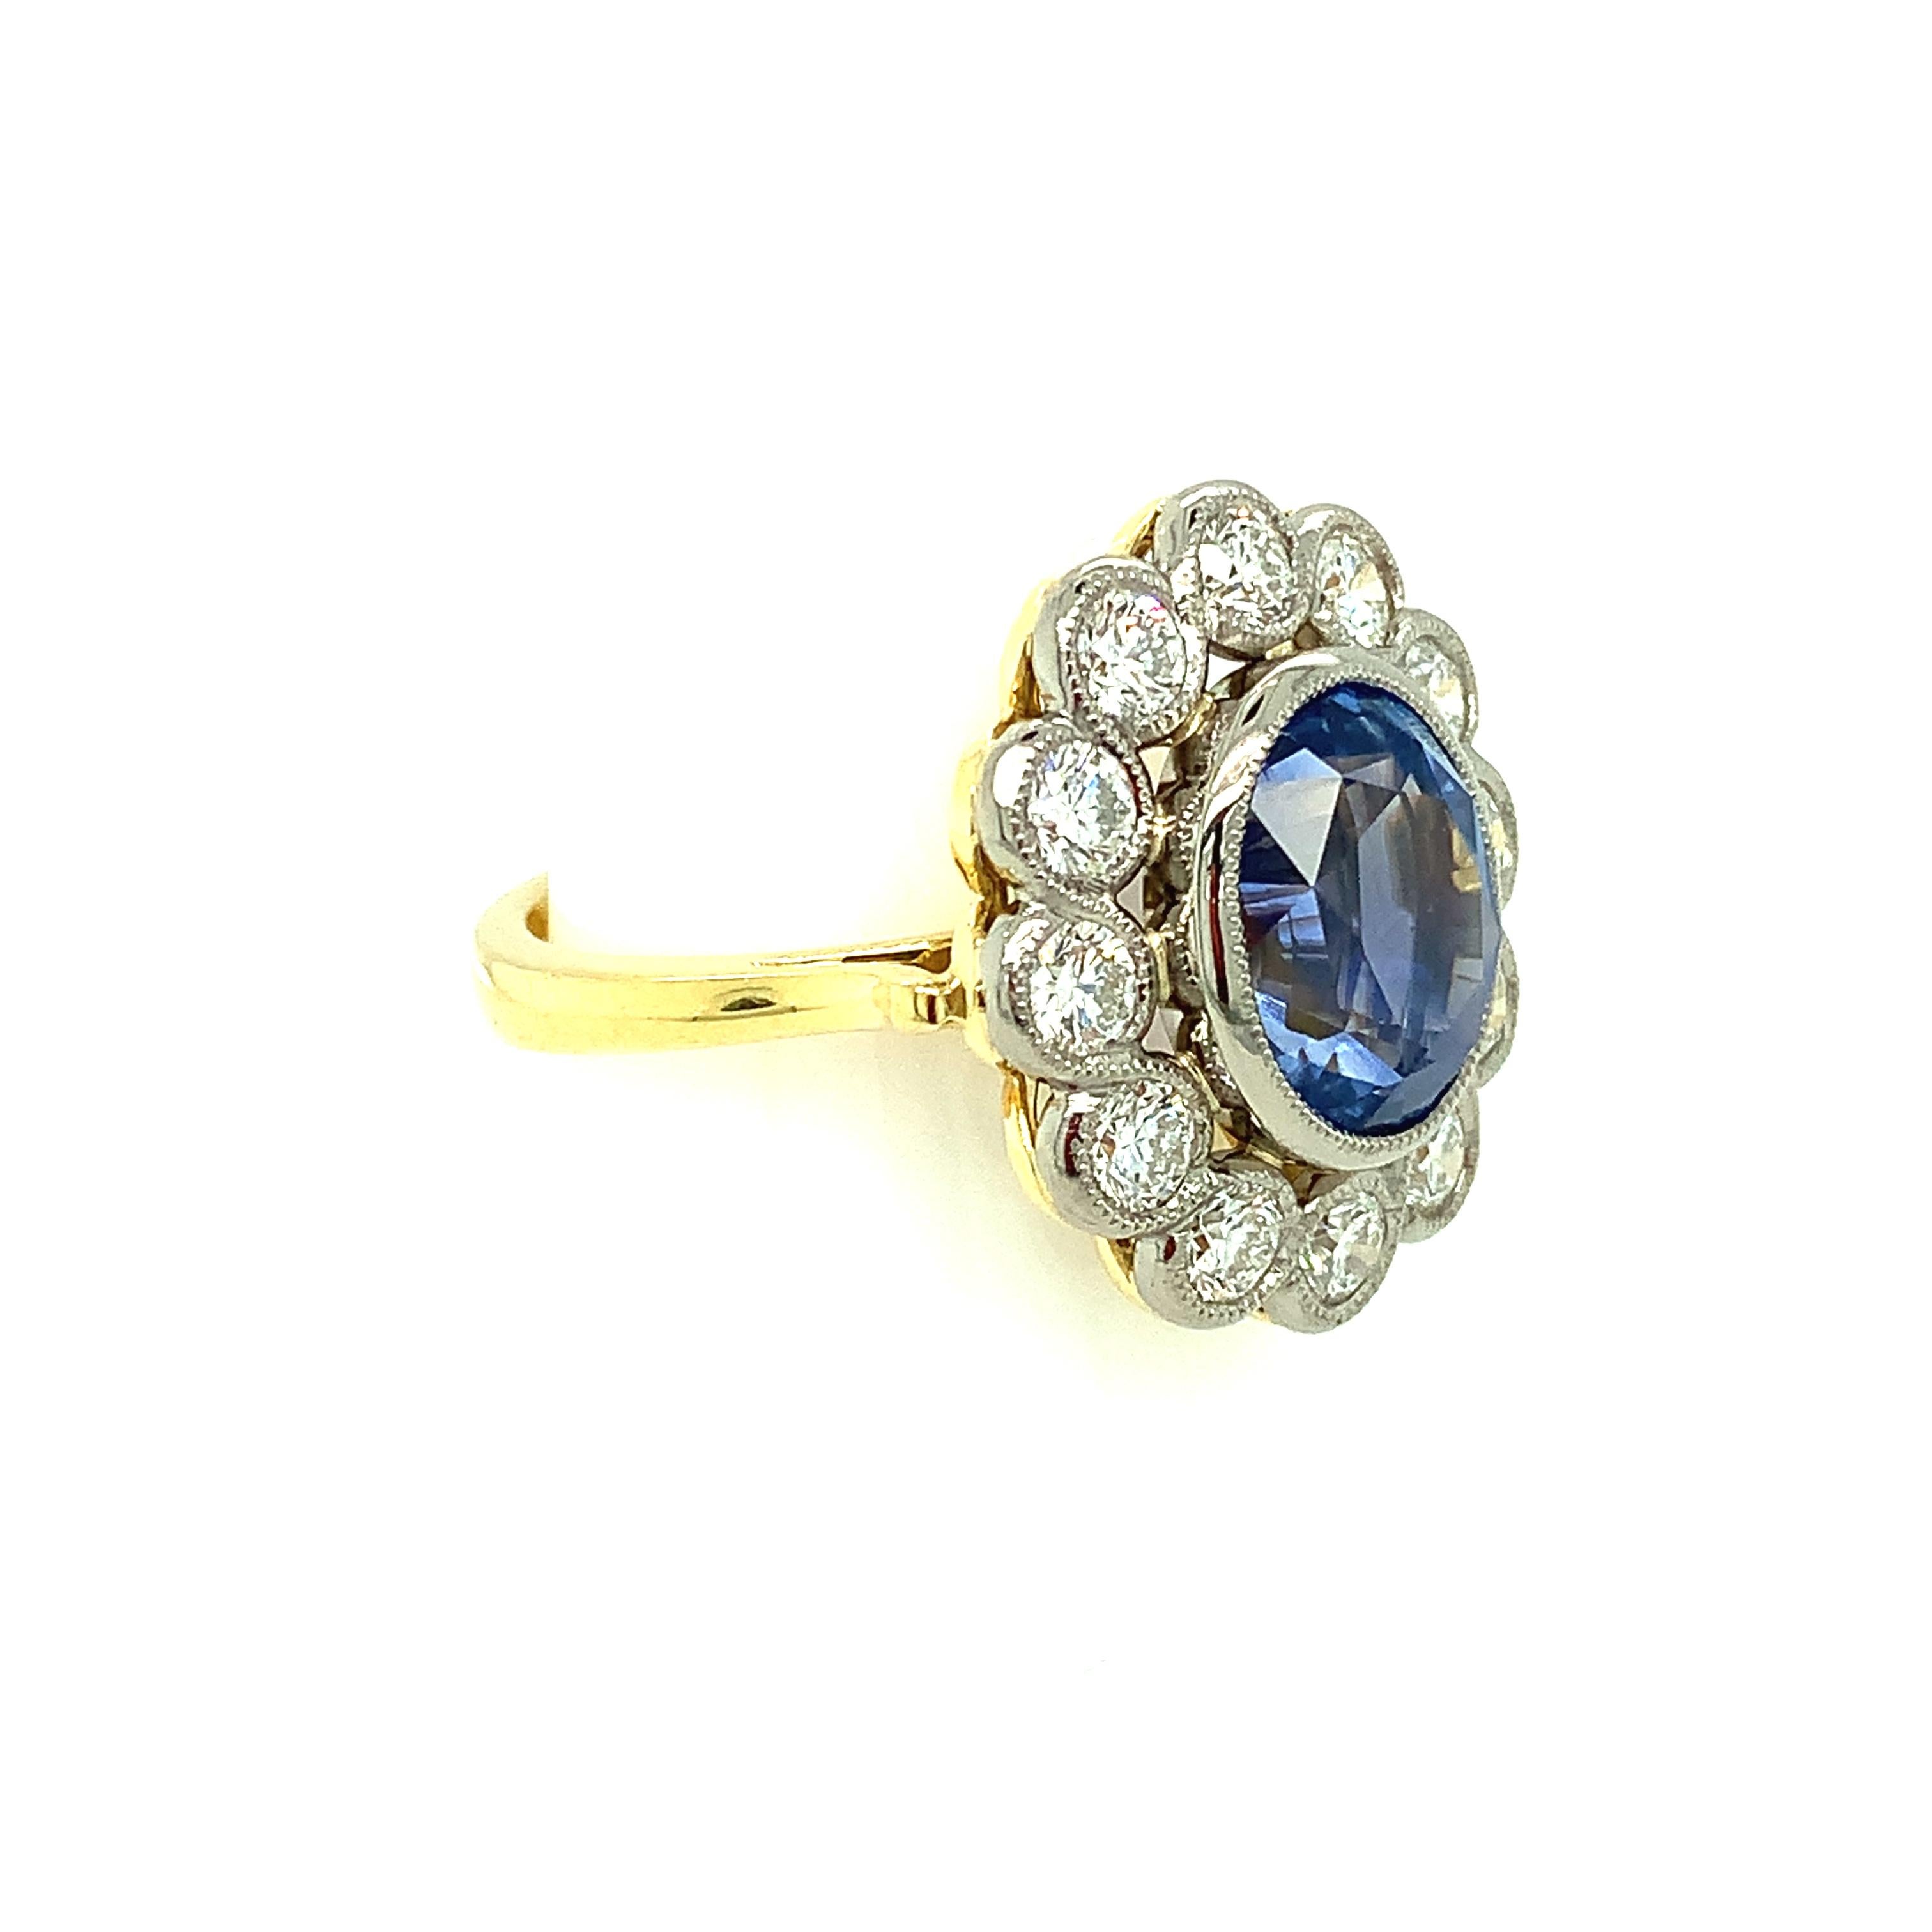 6.67 Carat Cornflower Blue Sapphire and Diamond Cocktail Ring in 18k Gold In New Condition For Sale In Los Angeles, CA